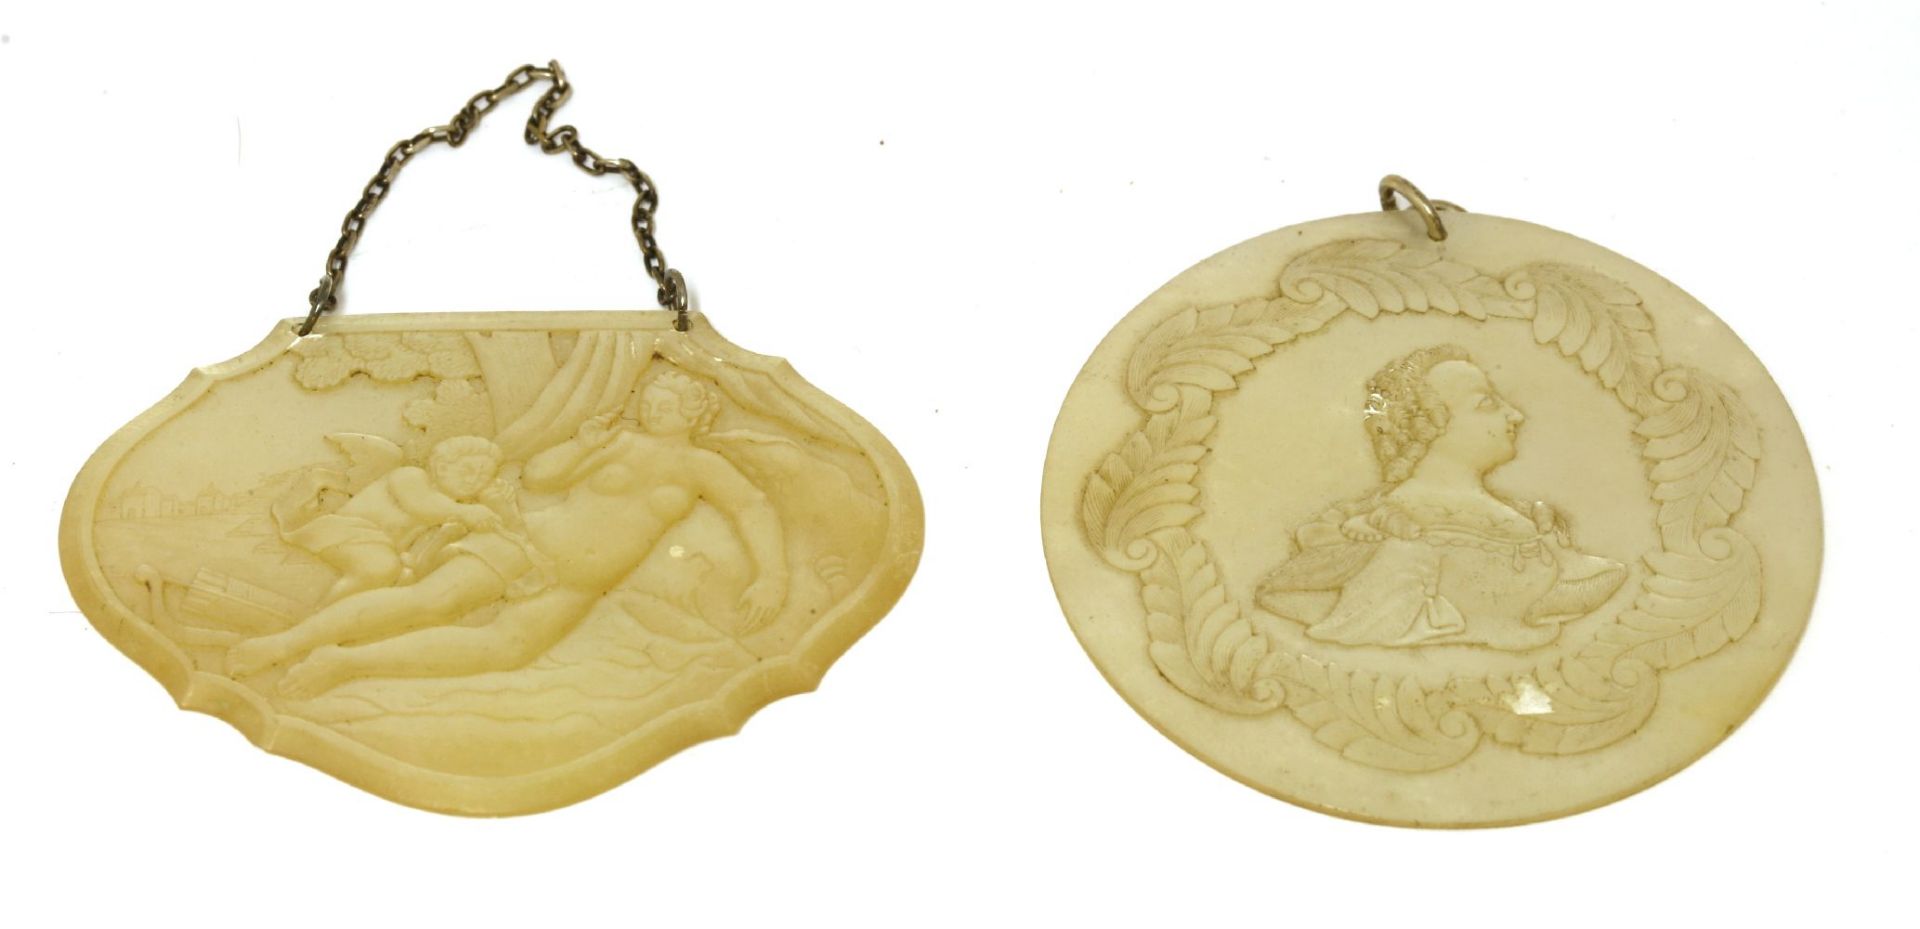 A carved mother-of-pearl plaque,early 19th century, Neapolitan, depicting Cupid and Venus, on a - Image 2 of 2